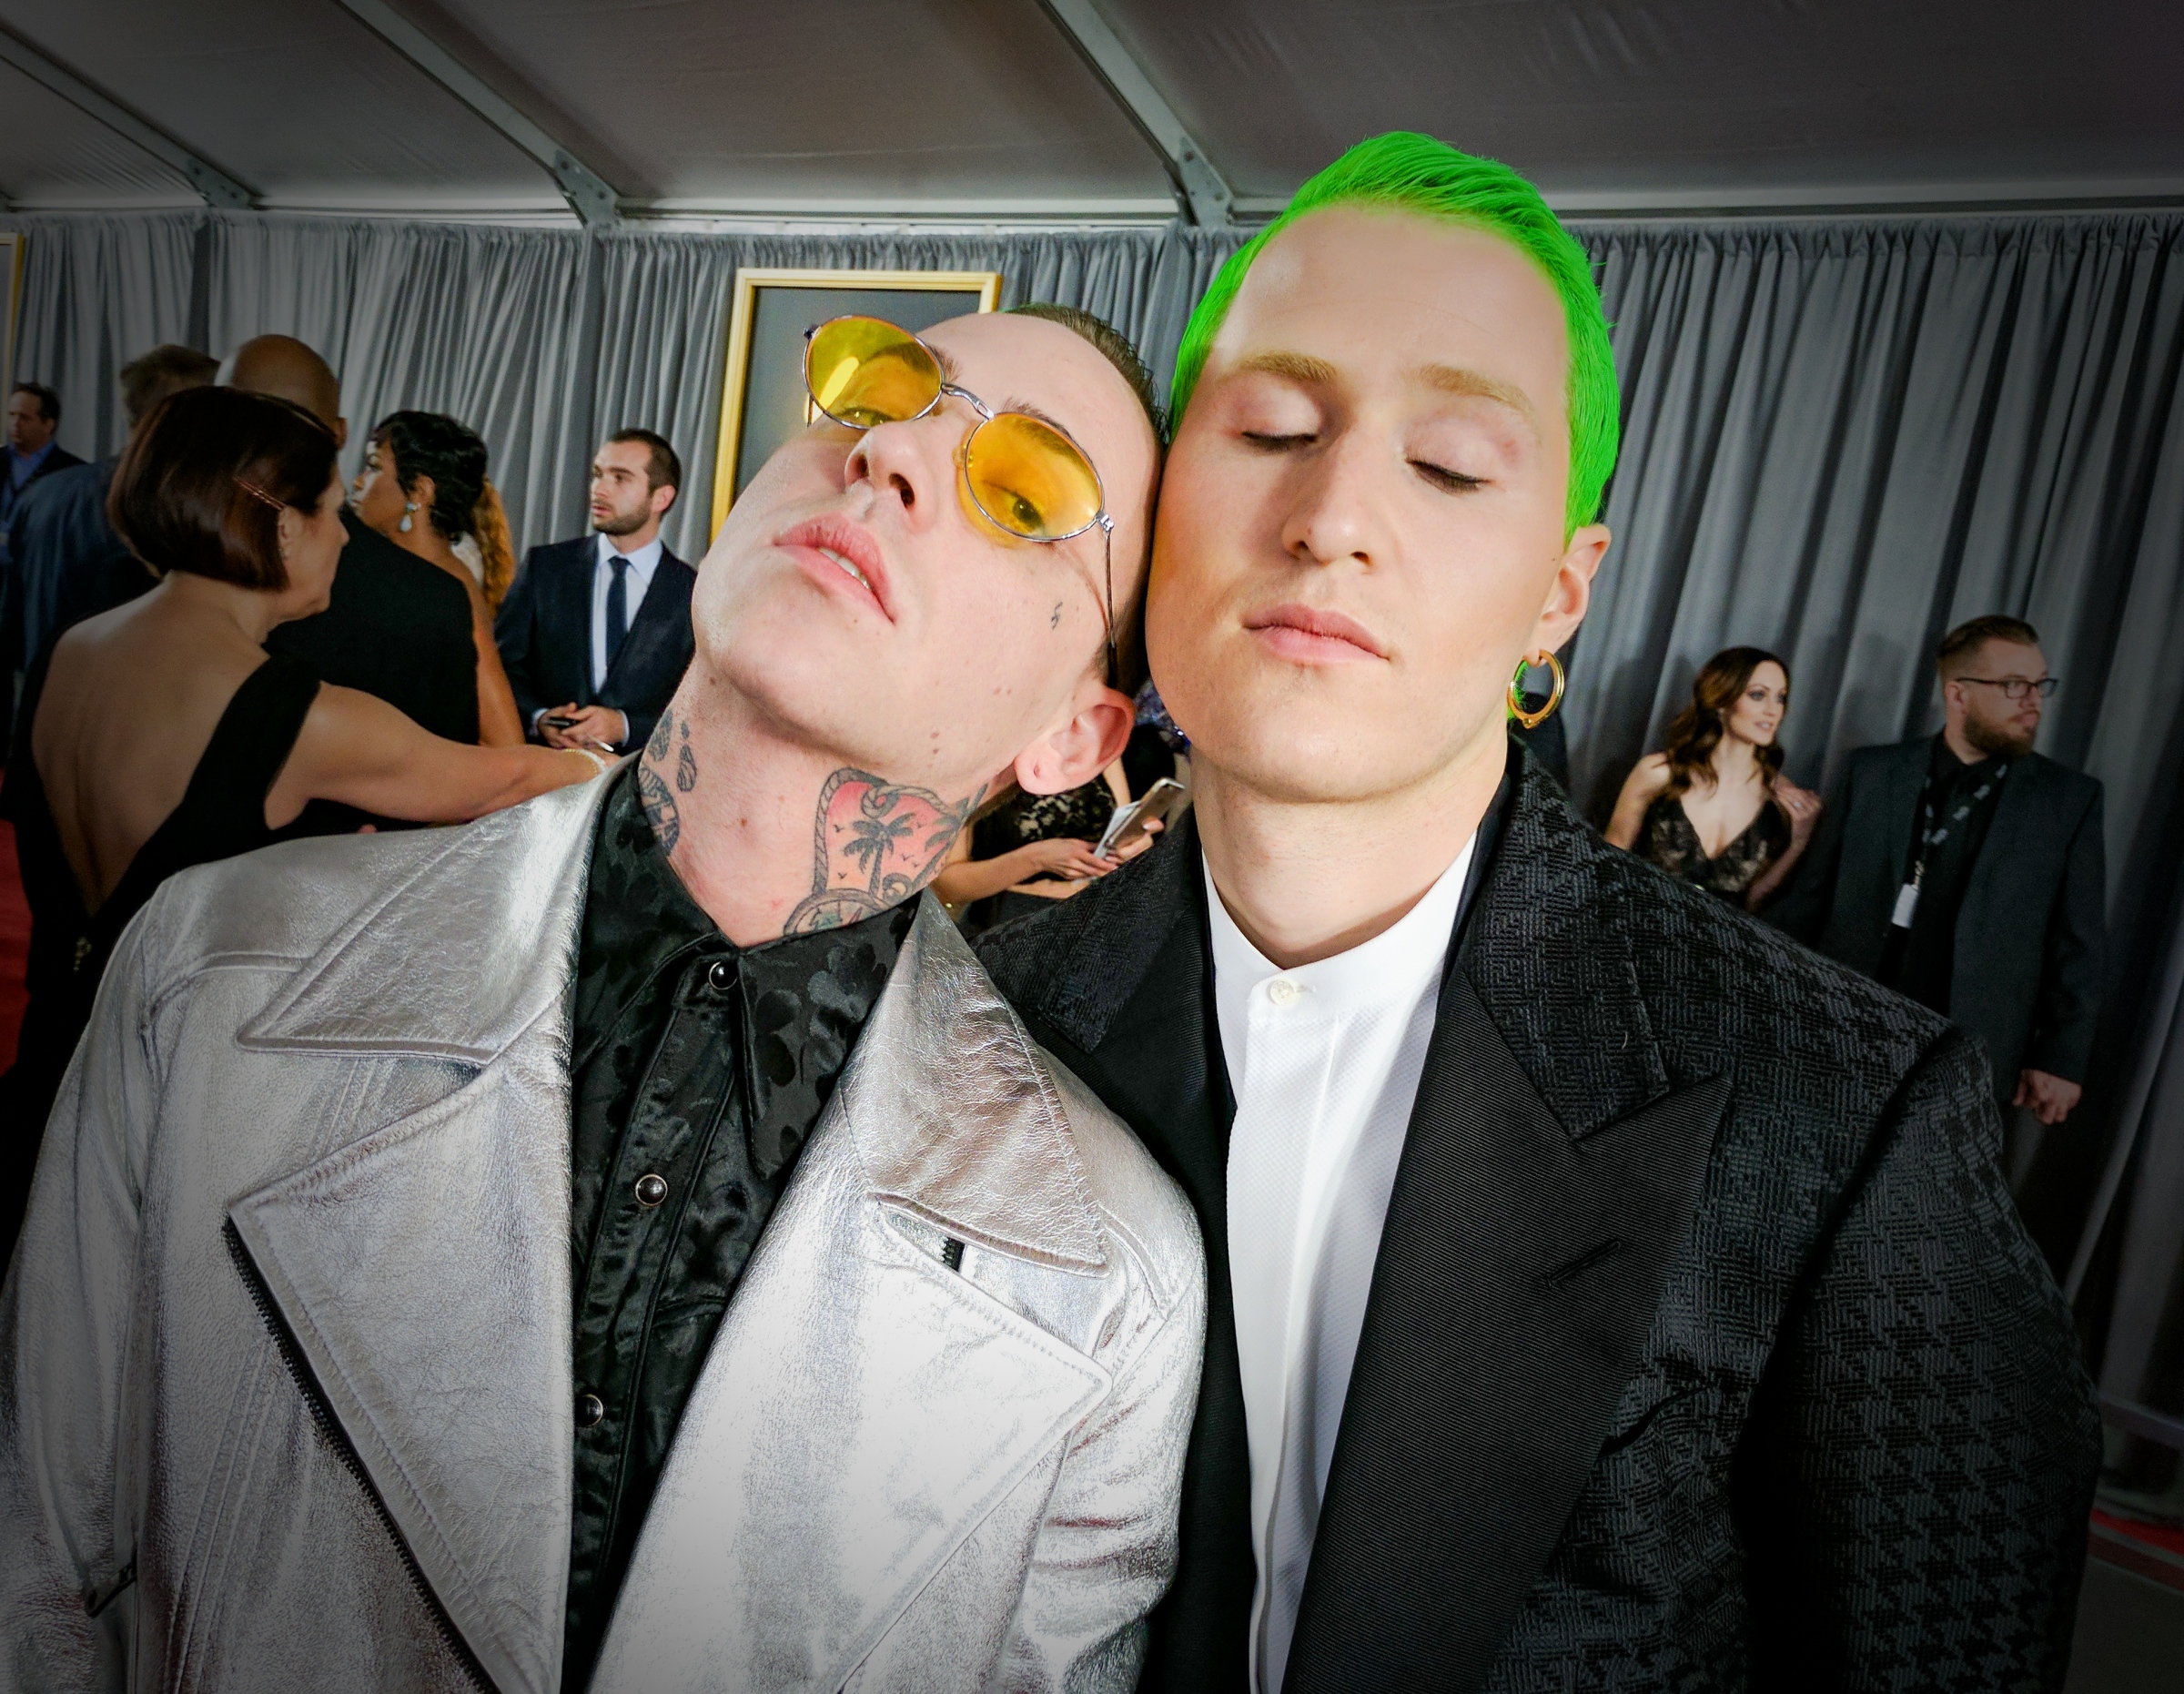 Blackbear and Mike Posner
Photo by Christopher Polk for Rolling Stone
